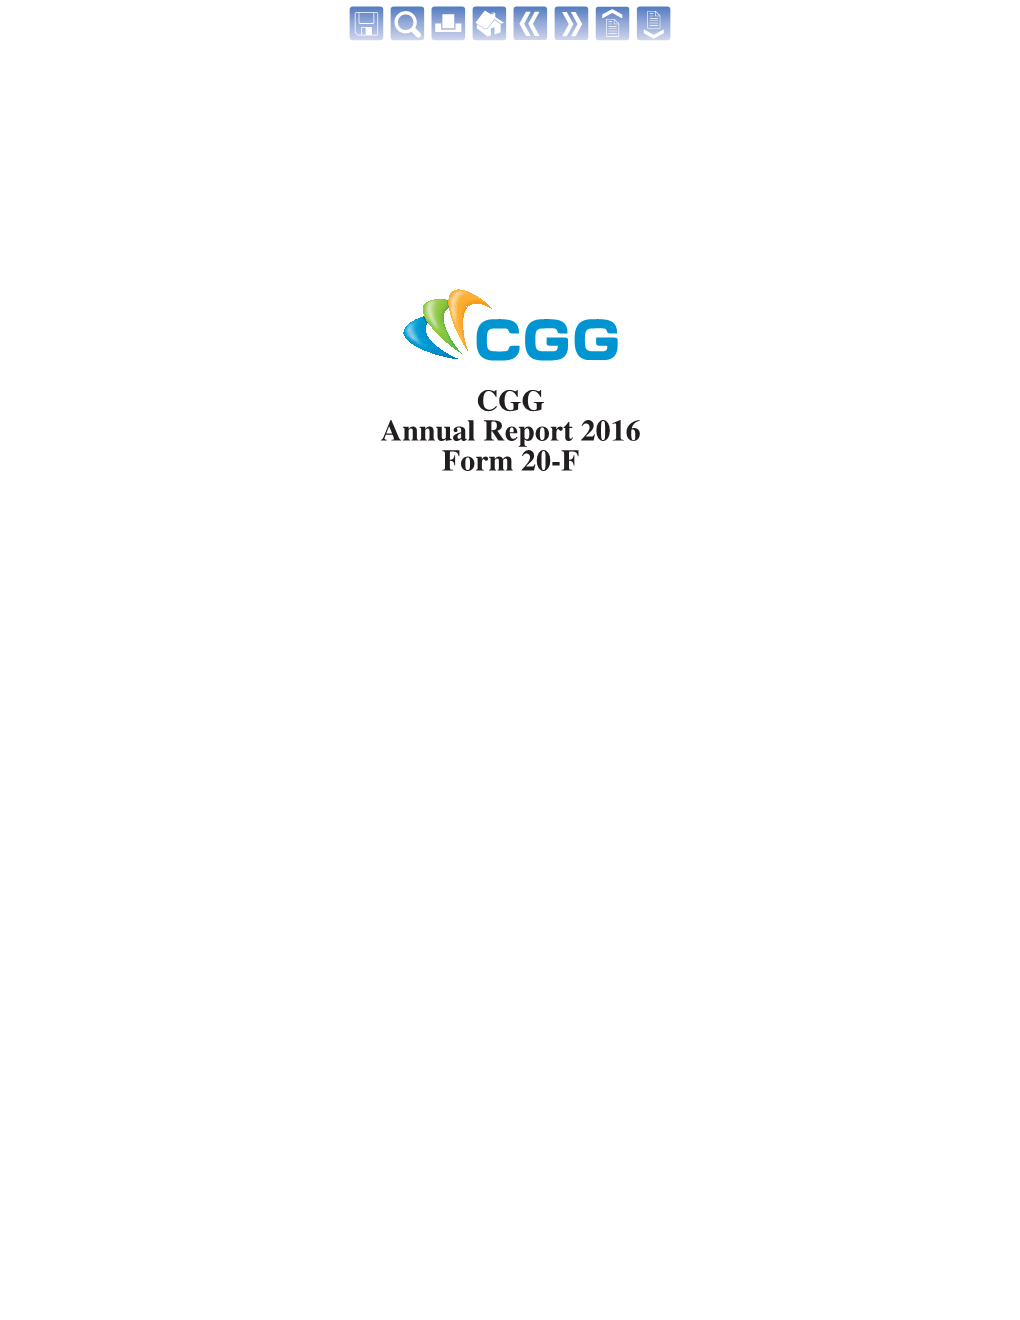 CGG Annual Report 2016 Form 20-F SECURITIES and EXCHANGE COMMISSION Washington, D.C